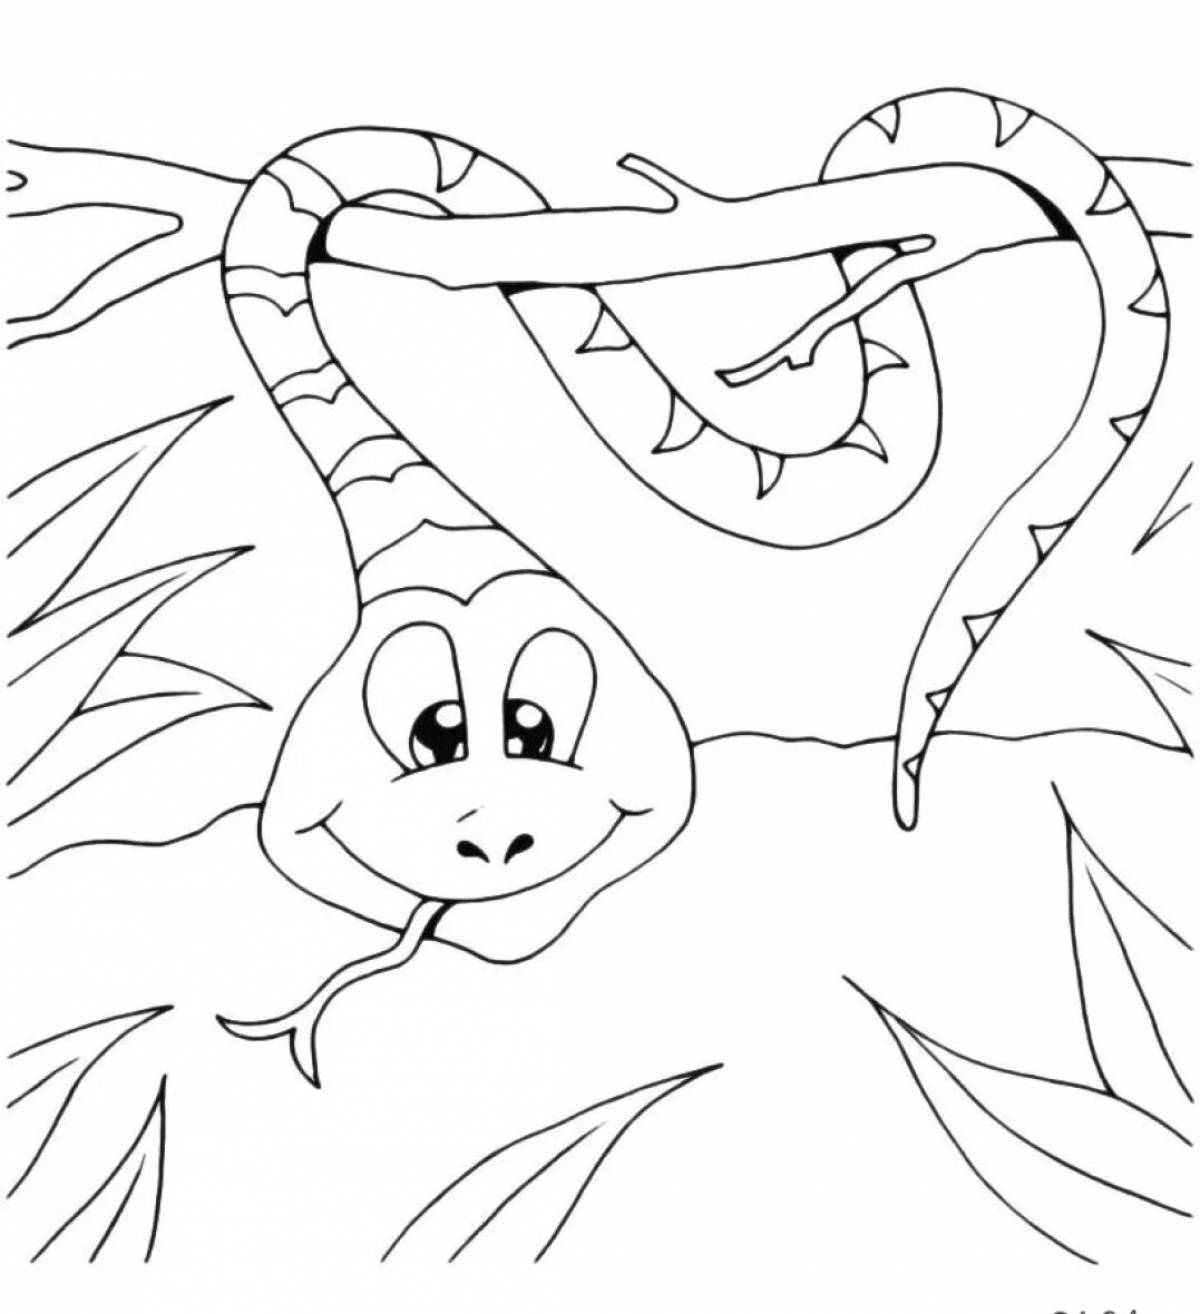 Kaa's amazing coloring page